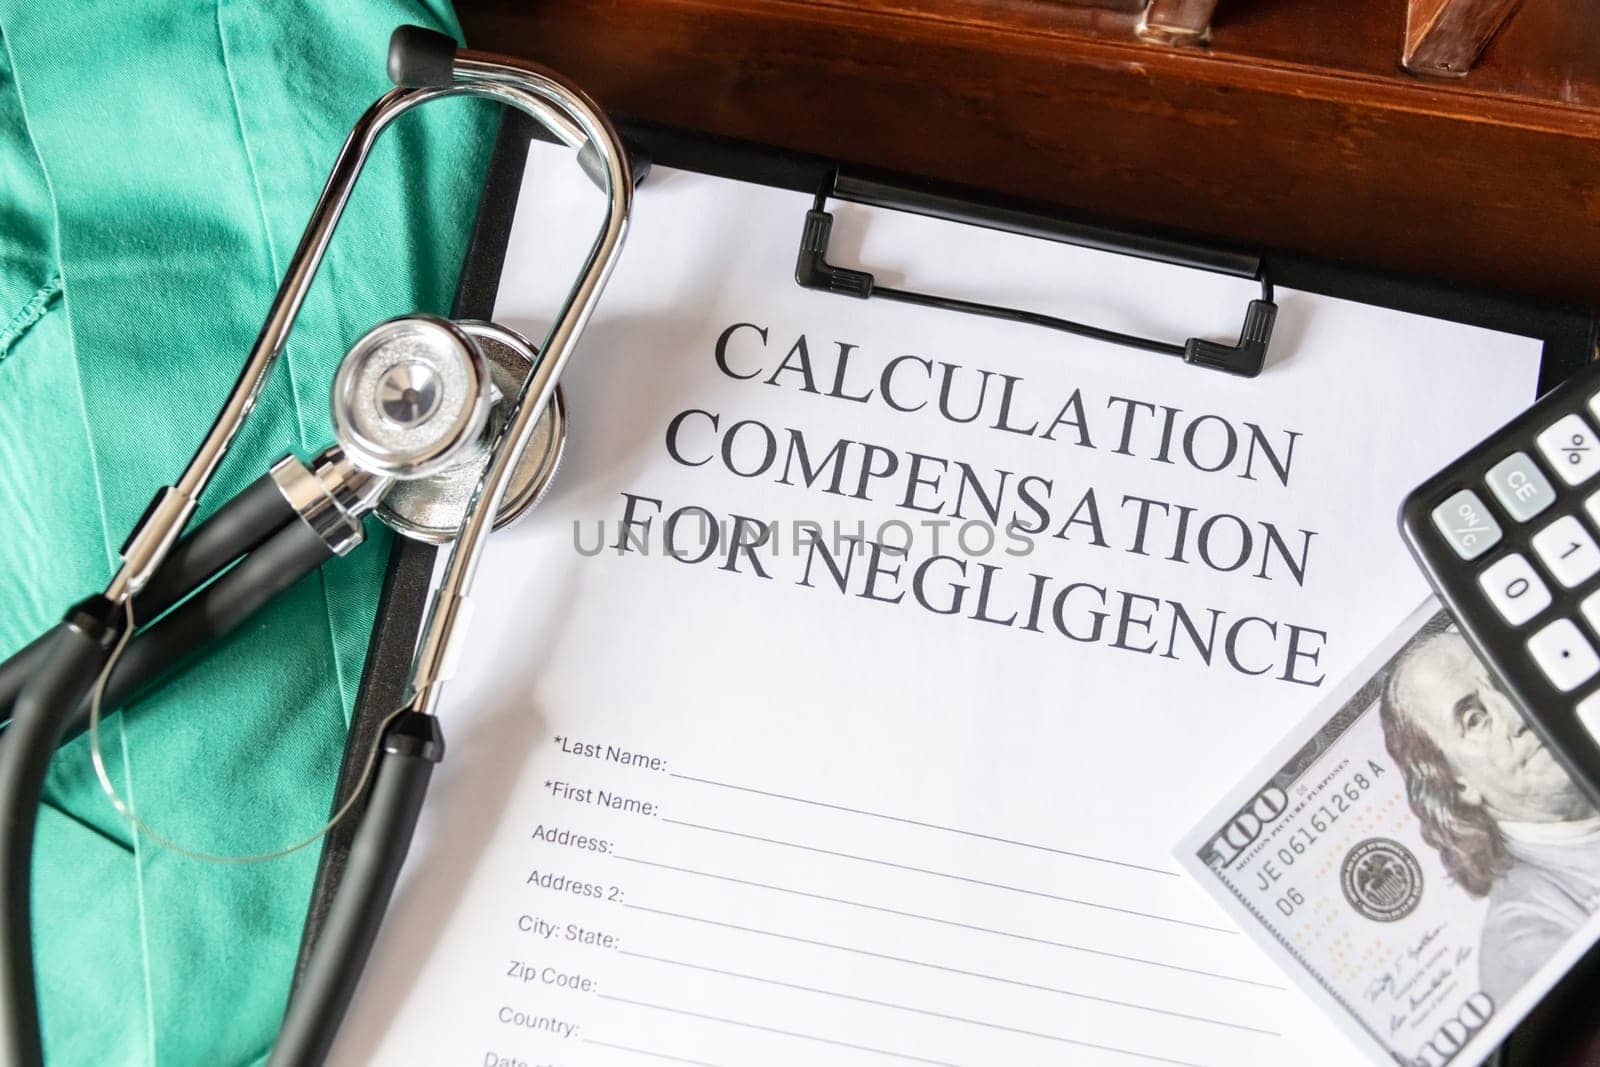 Document for calculating negligence compensation, with a stethoscope, money, and calculator on a medical uniform background